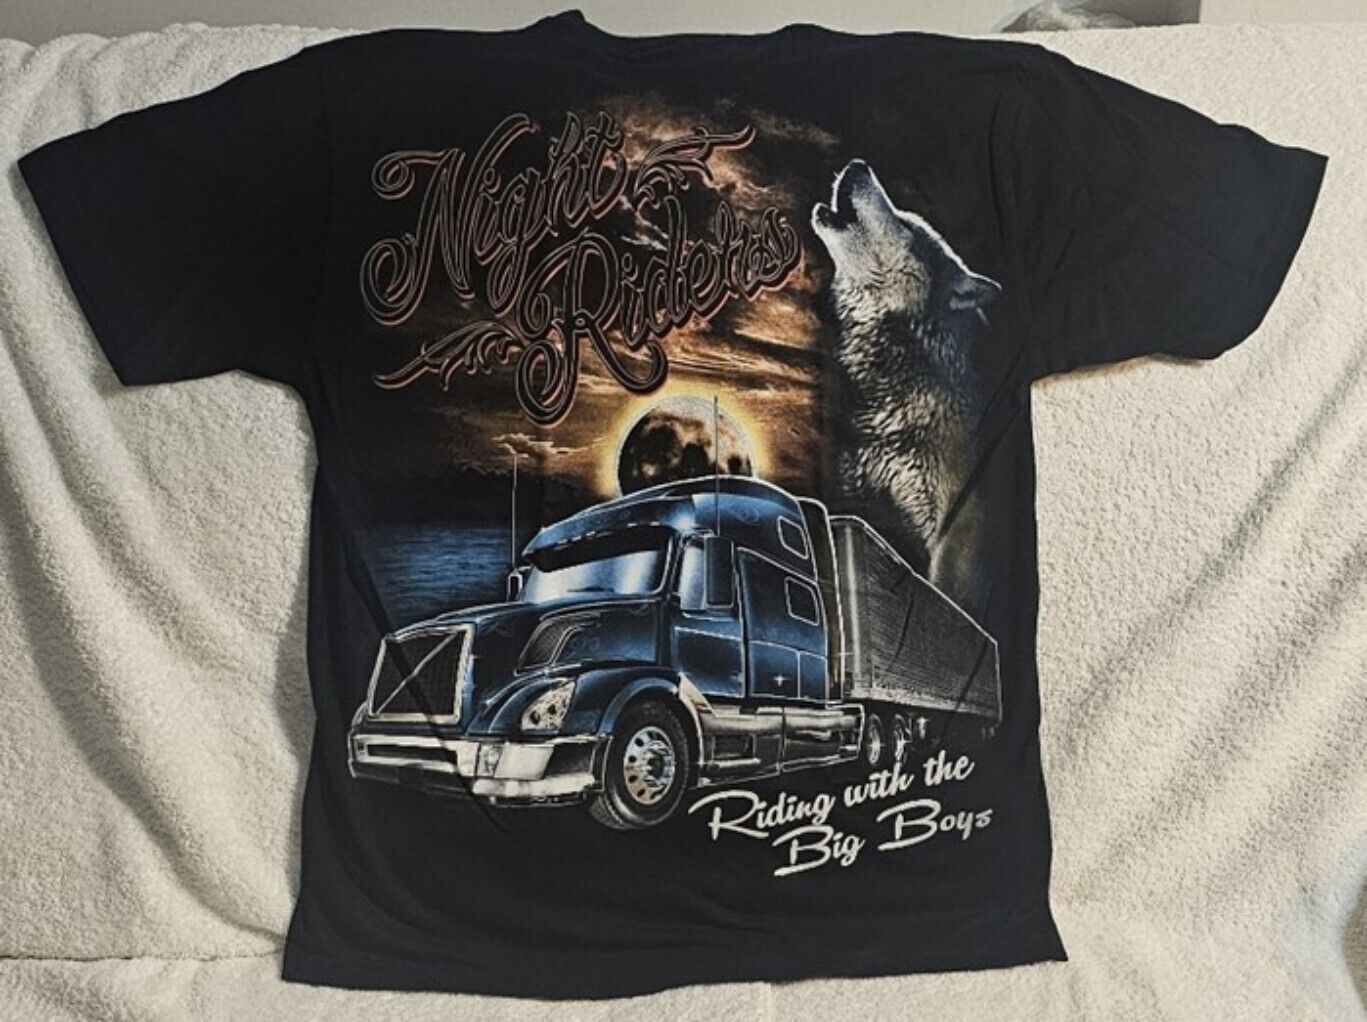 Primary image for SEMI TRUCK WOLF MOON NIGHT RIDERS RIDING WITH THE BIG BOYS TRUCKER T-SHIRT